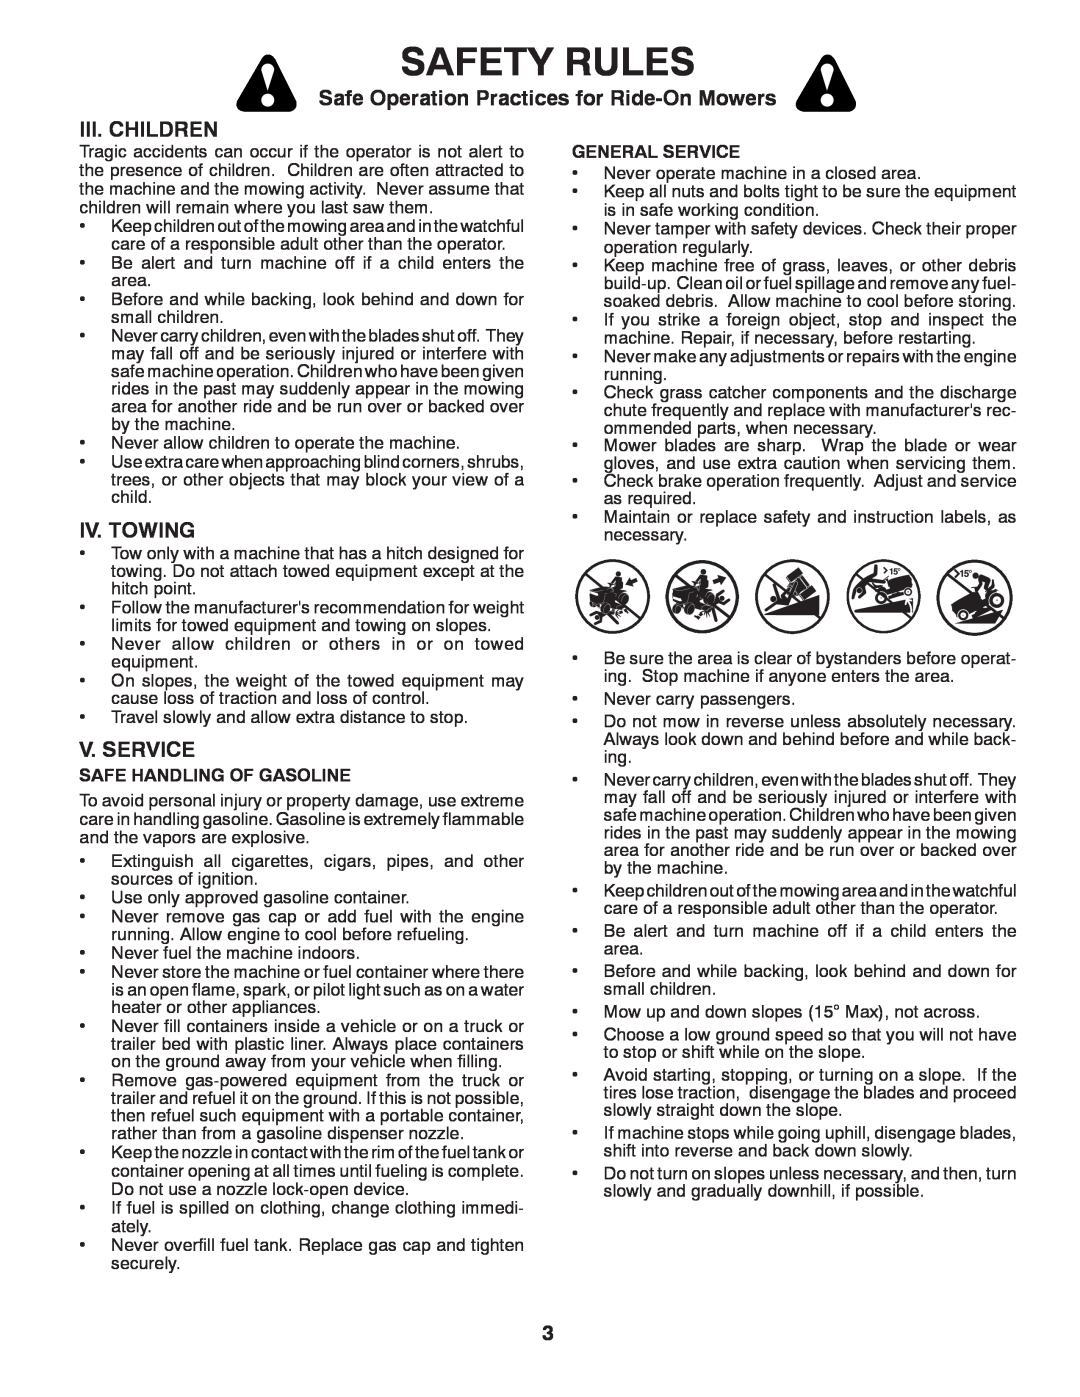 Dixon D25K48YT, 435068 Iii. Children, Iv. Towing, V. Service, Safety Rules, Safe Operation Practices for Ride-OnMowers 